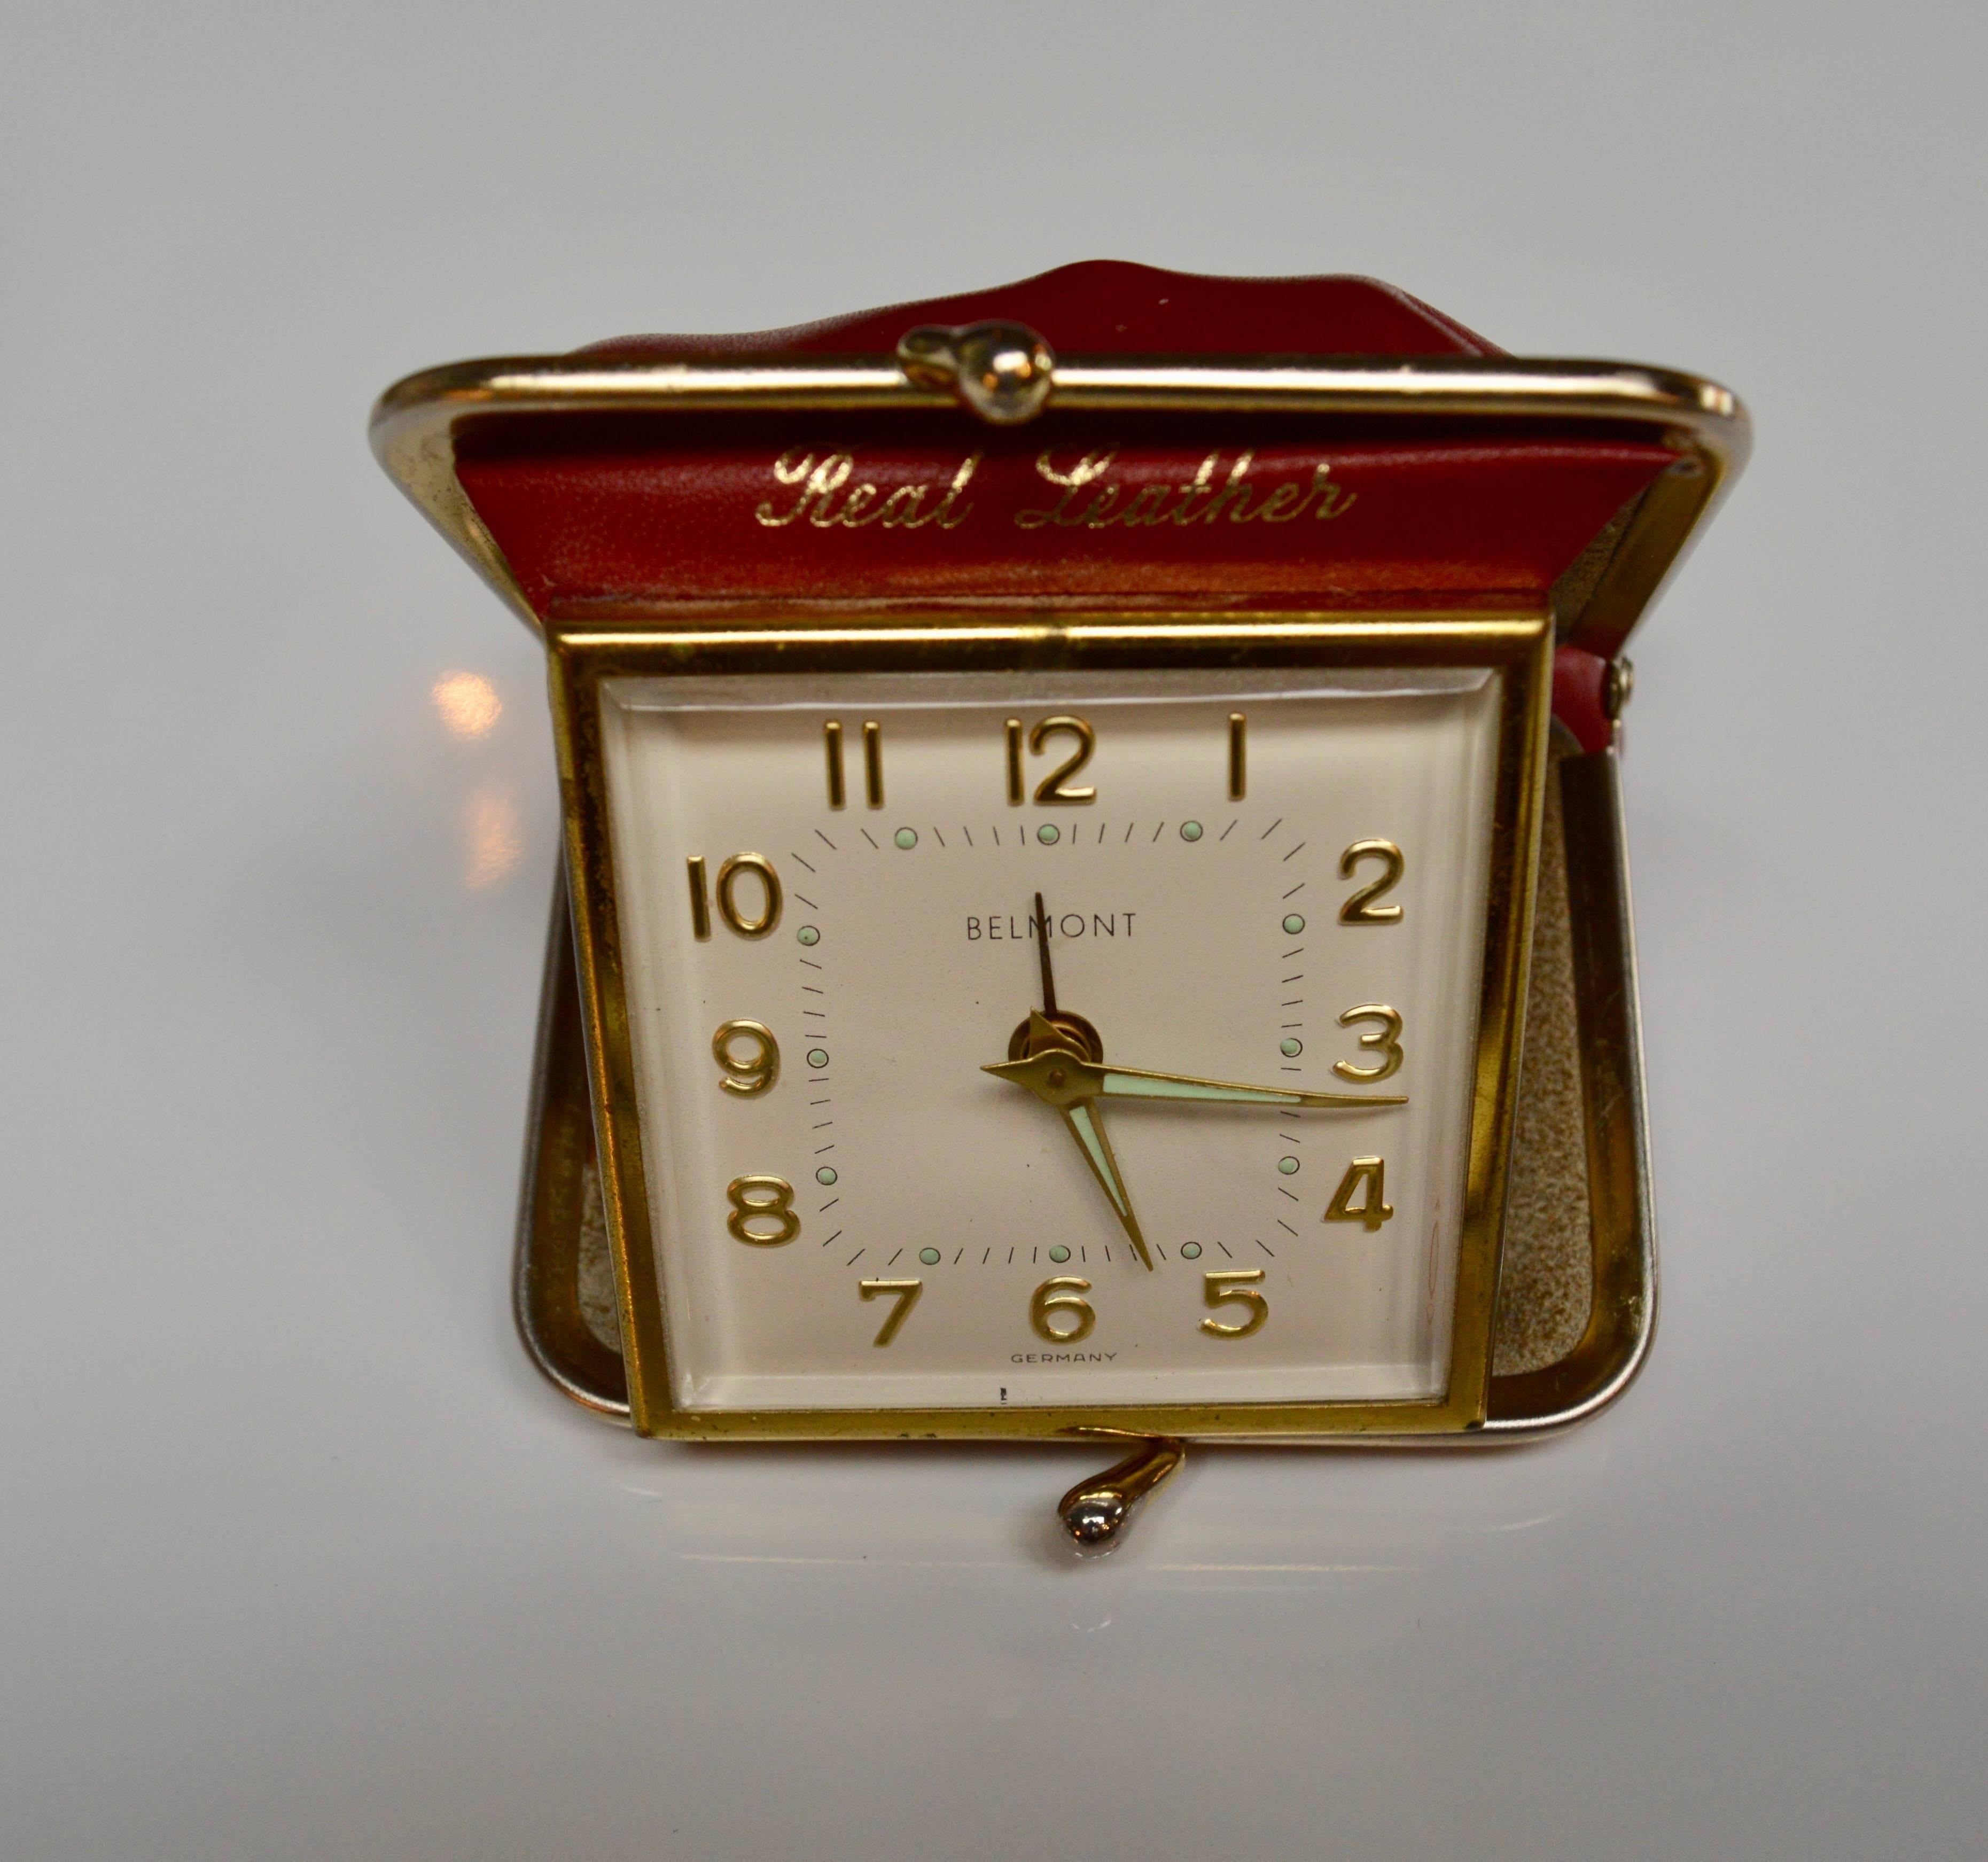 Miniature travel clocked enclosed in a change purse. Cute trinket/ gift. Looks like a change purse when closed. Brass clock folds open when purse is opened. Great condition.